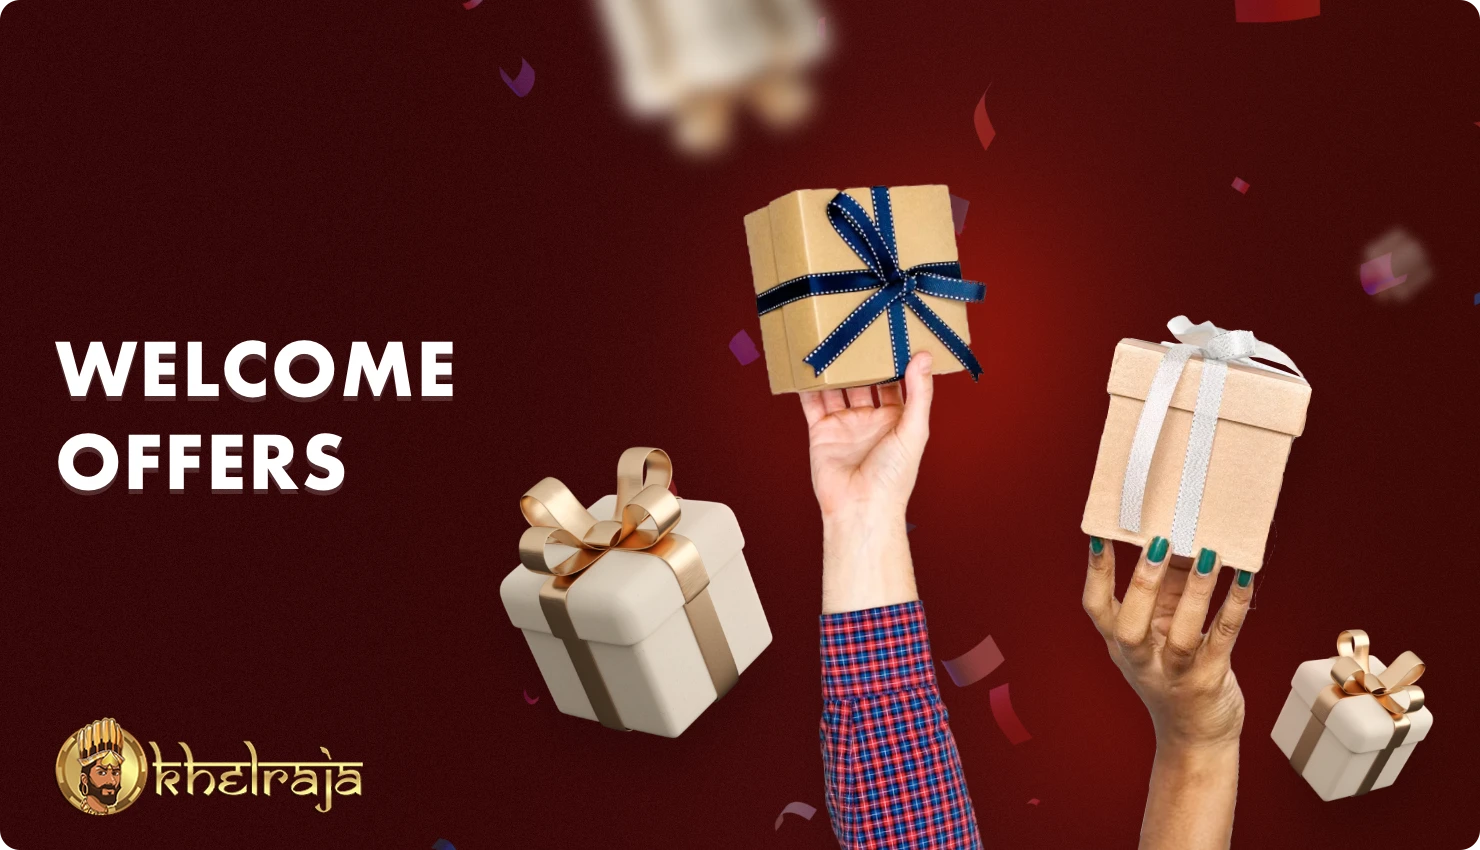 Khelraja's welcome offers apply exclusively to users from India